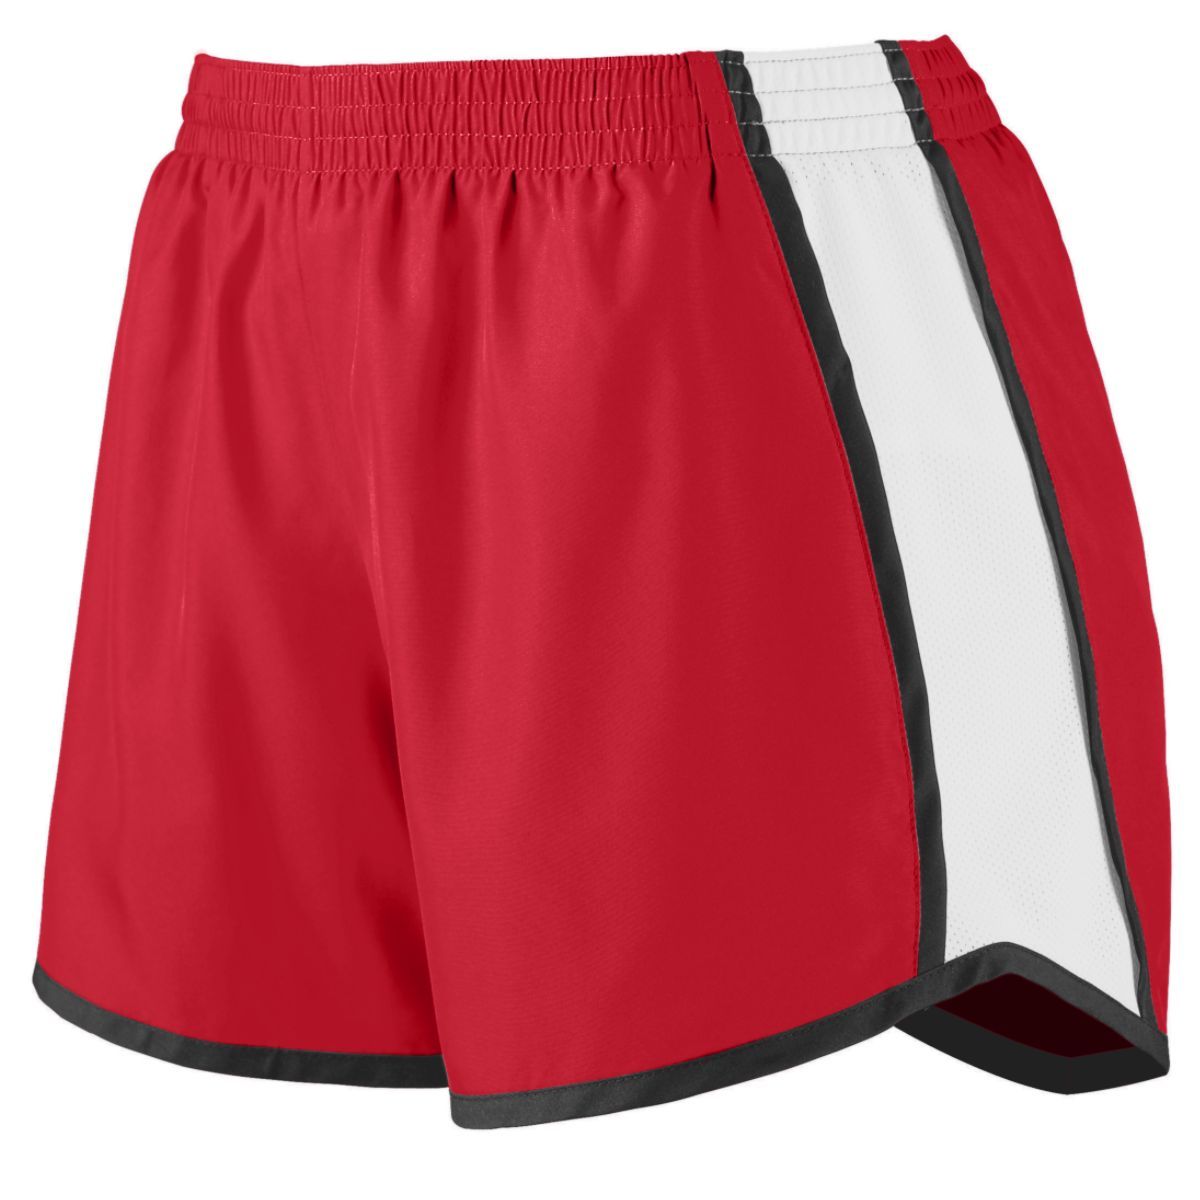 Augusta Sportswear Ladies Pulse Shorts in Red/White/Black  -Part of the Ladies, Ladies-Shorts, Augusta-Products, Volleyball product lines at KanaleyCreations.com